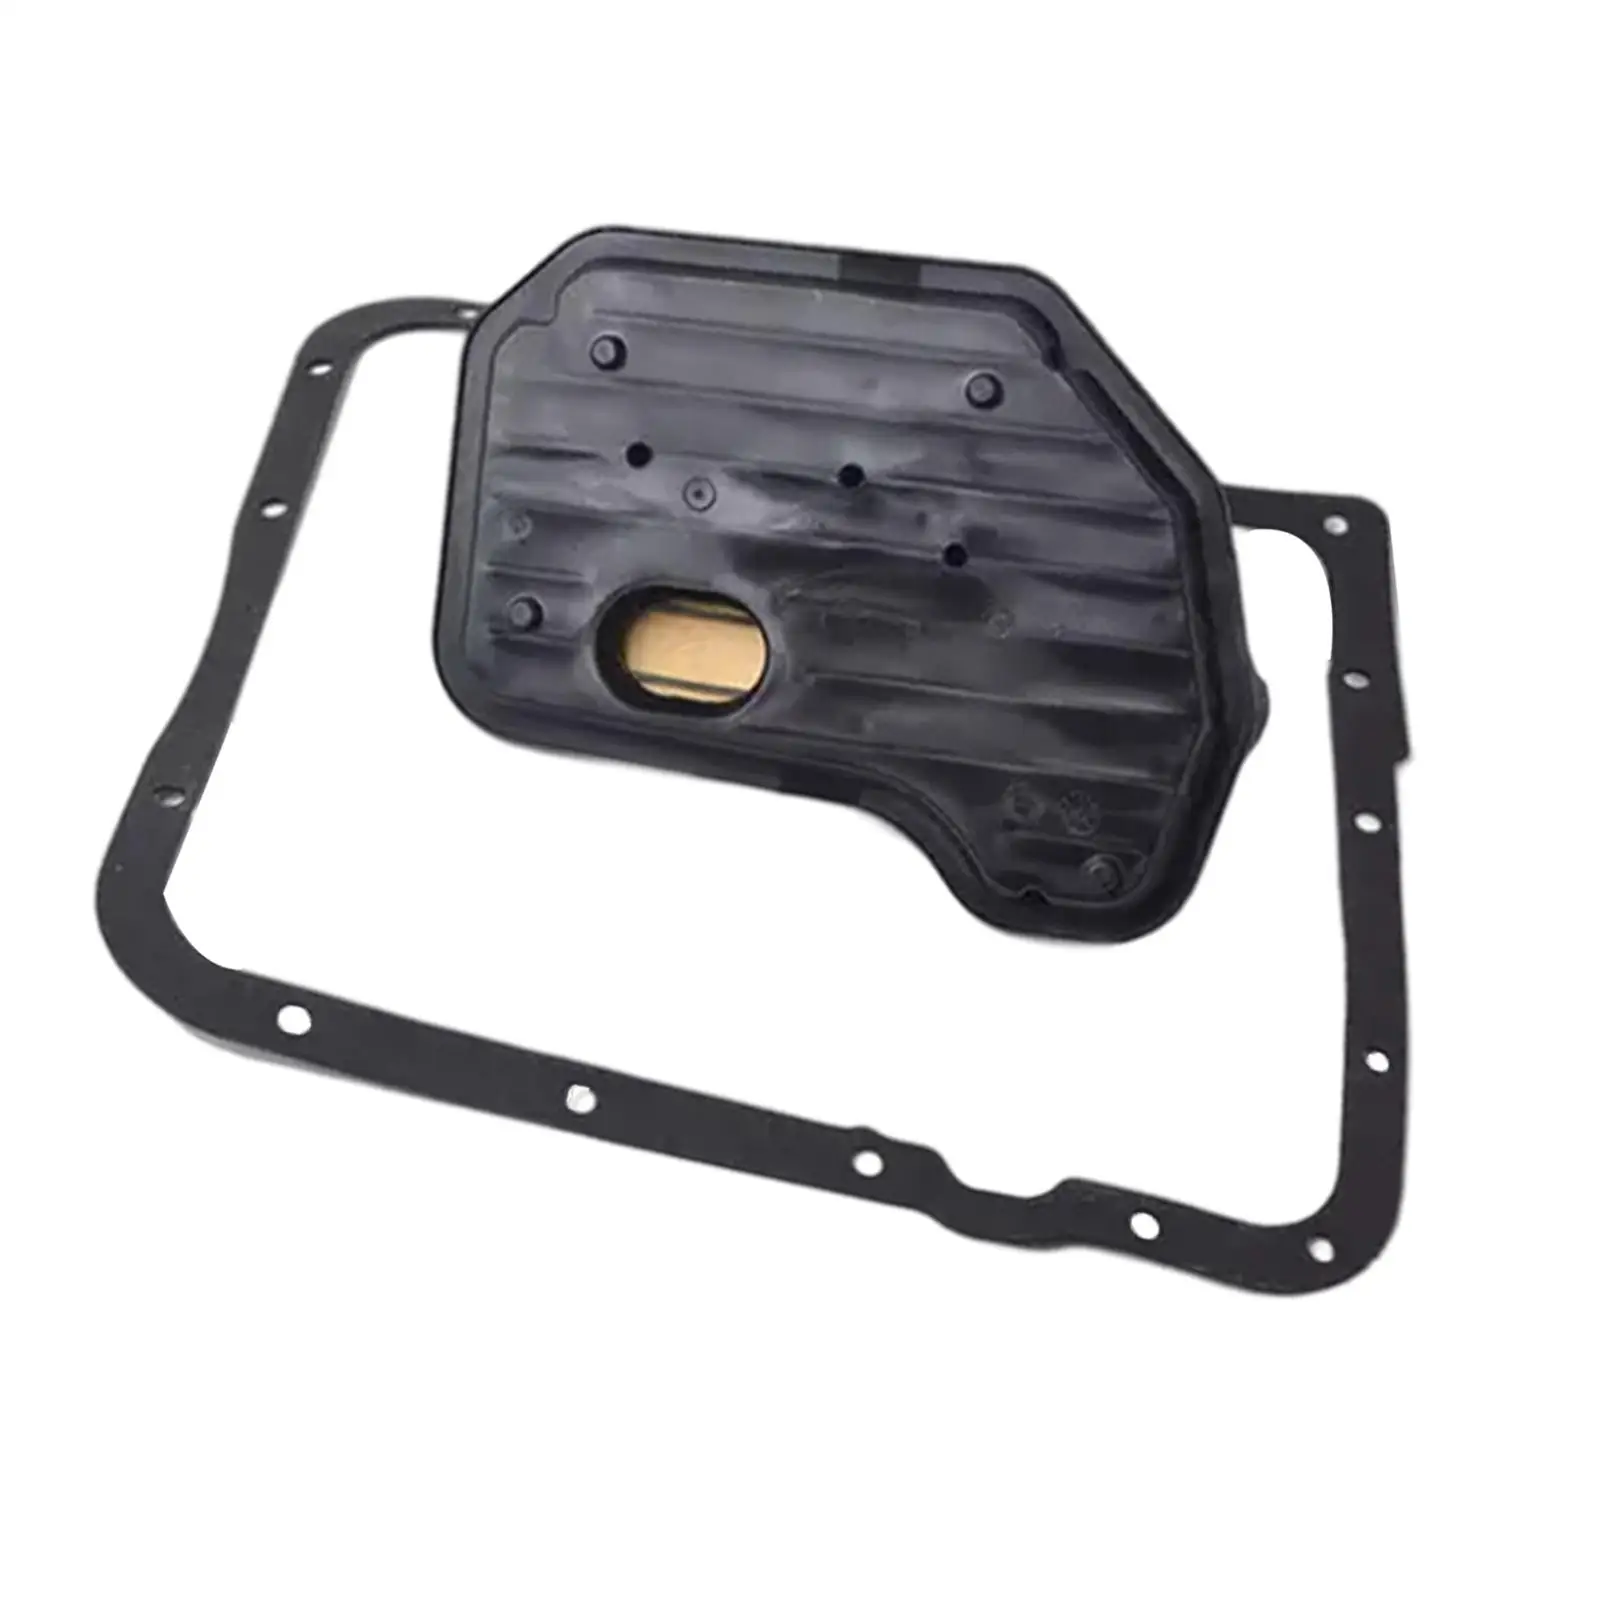 Automatic Transmission Filter with Gasket 24208576 Fits for  Parts